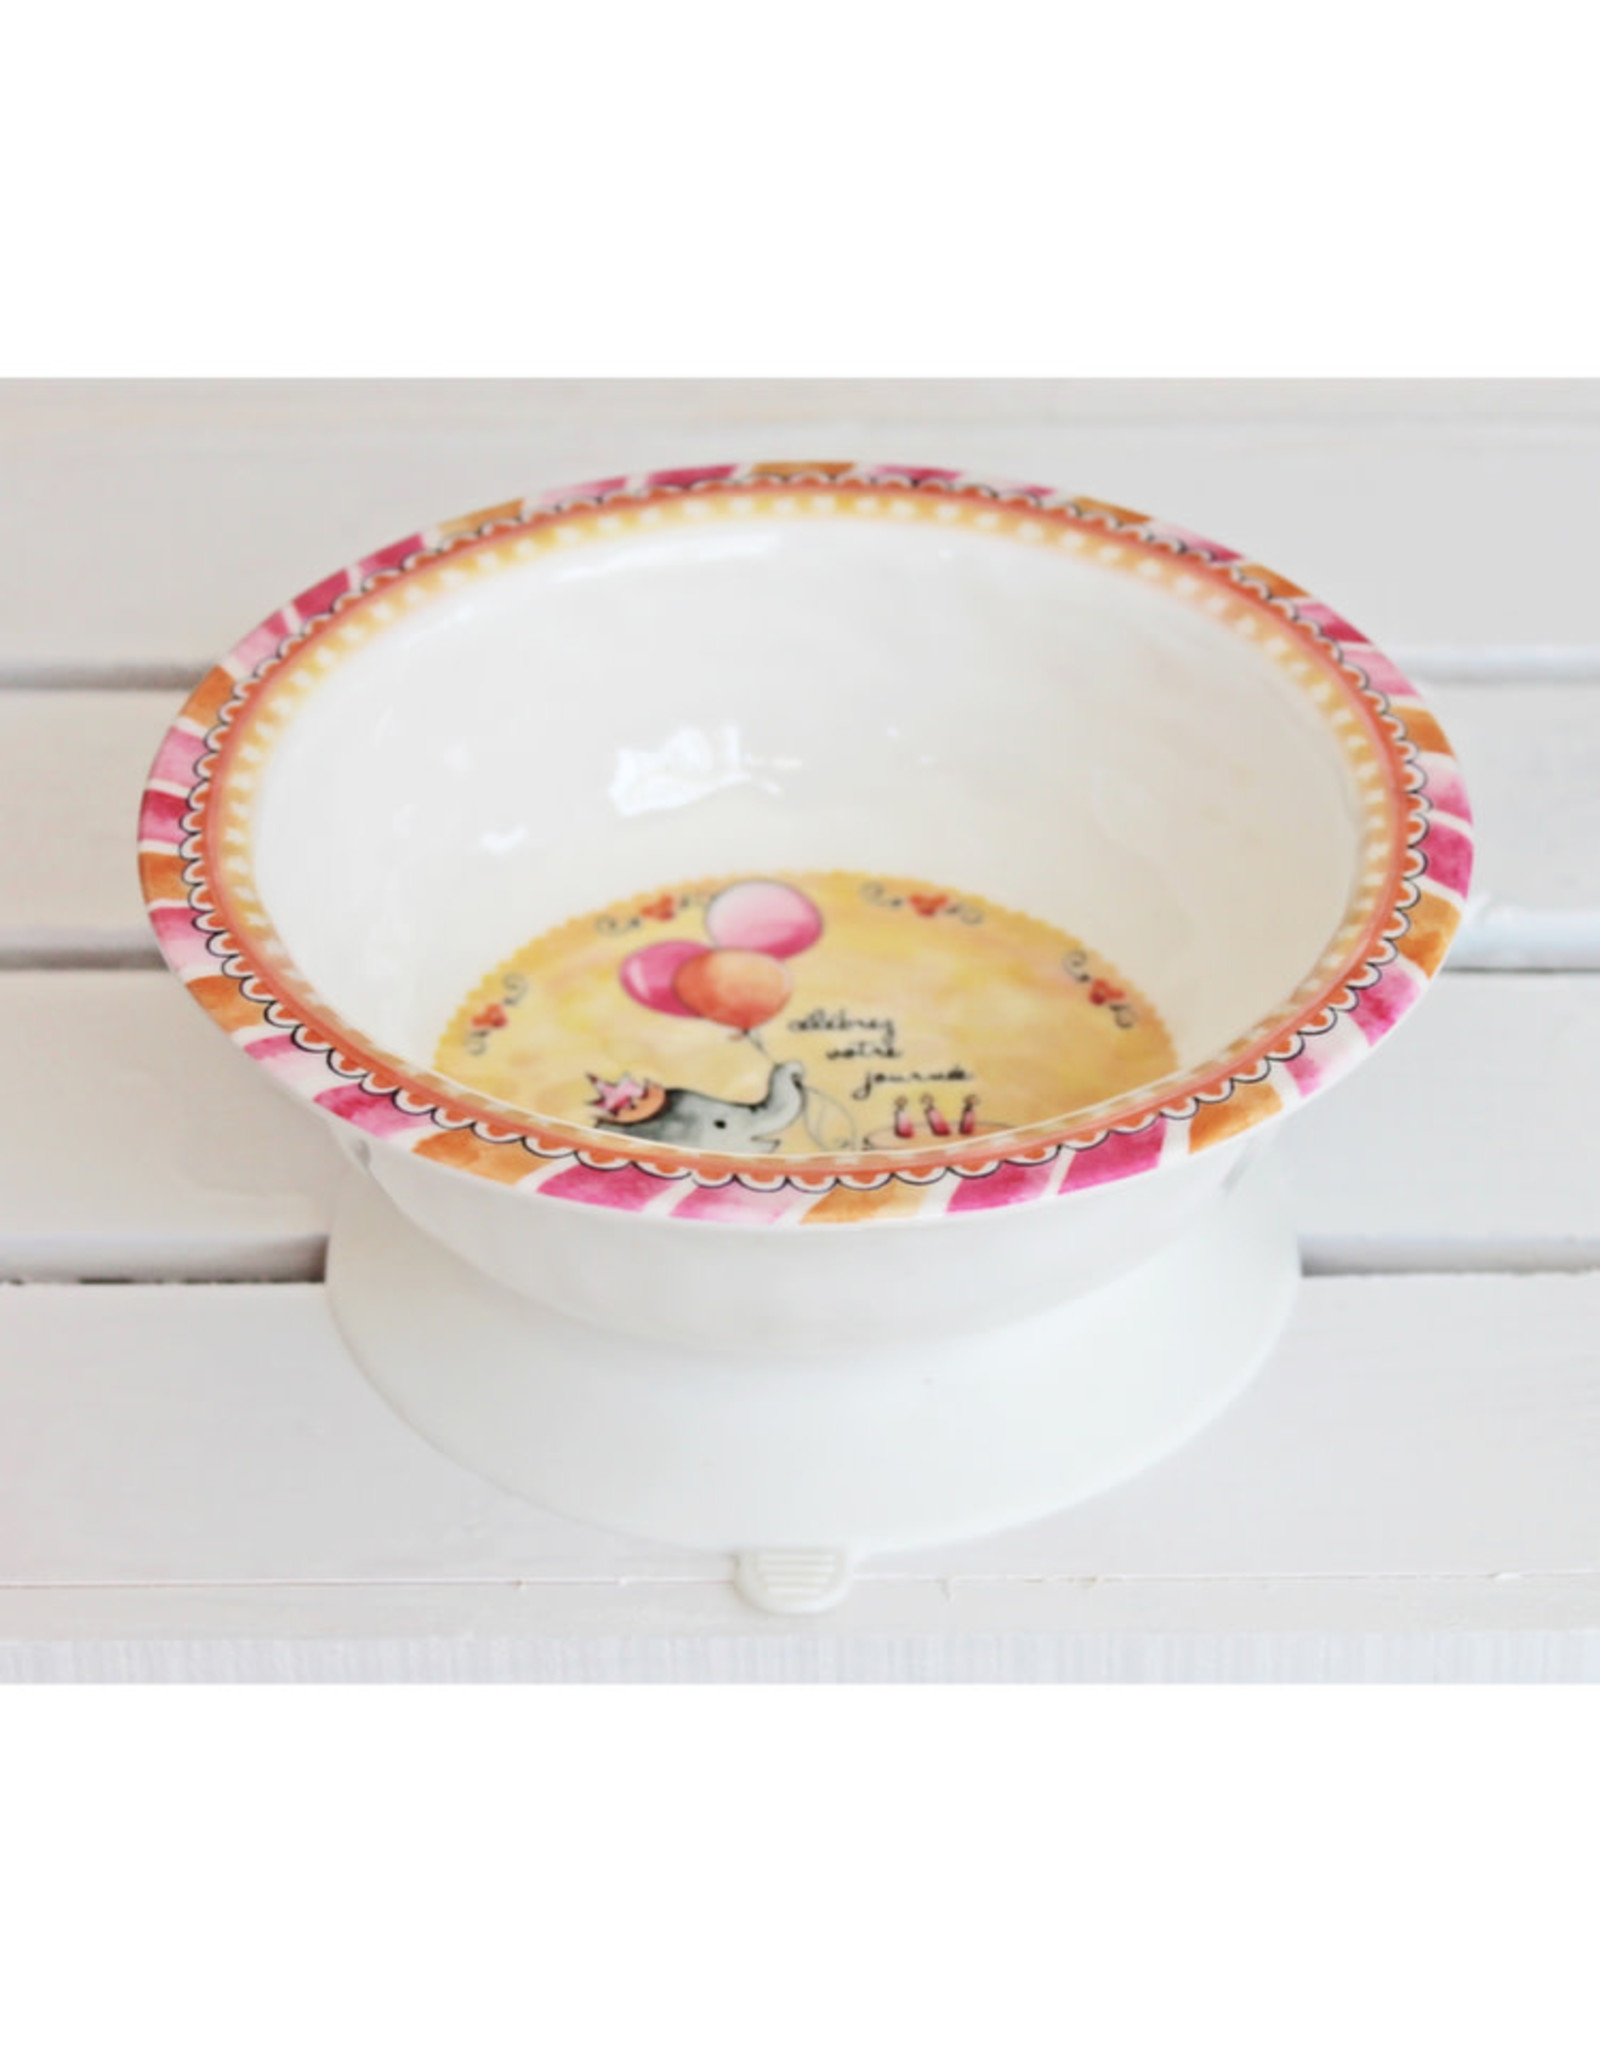 BABY CIE SUCTION BOWL CELEBRATE YOUR DAY